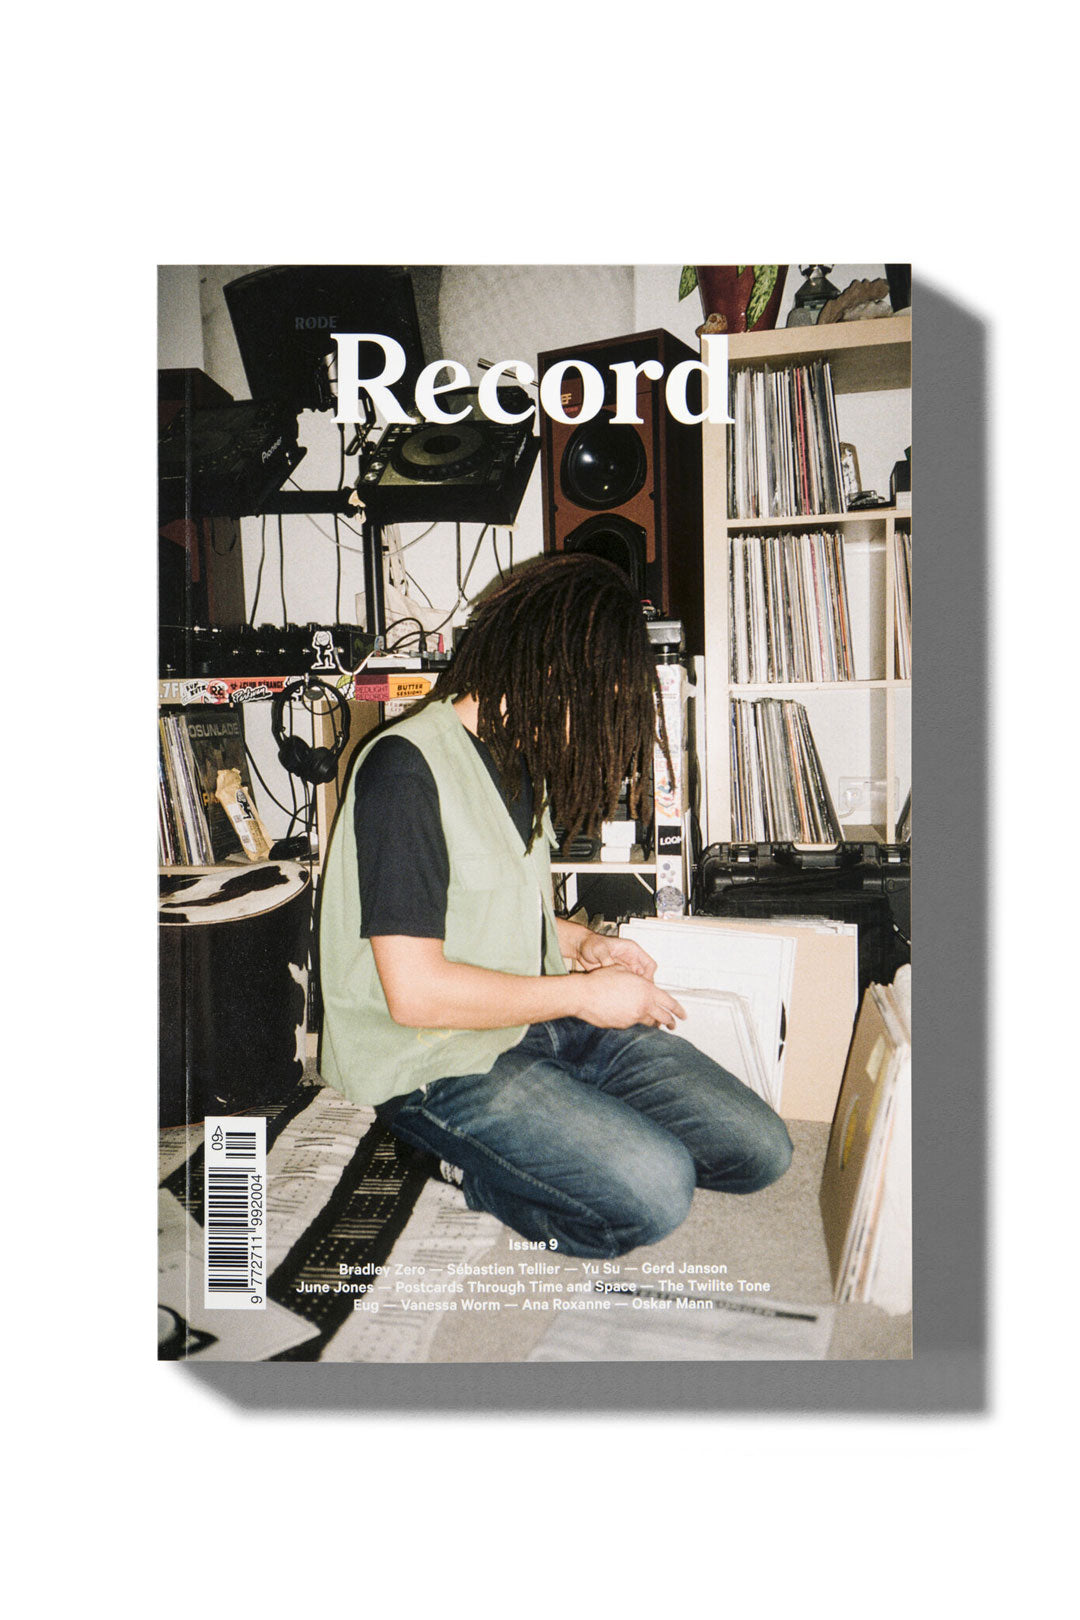 Record Culture Magazine Issue 9, 2021.  Featuring Bradley Zero, Sébastien Tellier, Yu Su, Gerd Janson, June Jones, The Twilite Tone, Eug, Vanessa Worm, Ana Roxanne, Oskar Mann, and the Beats in Space visual feature, “Postcards Through Time and Space”  212 pages, Perfect bound, Softcover